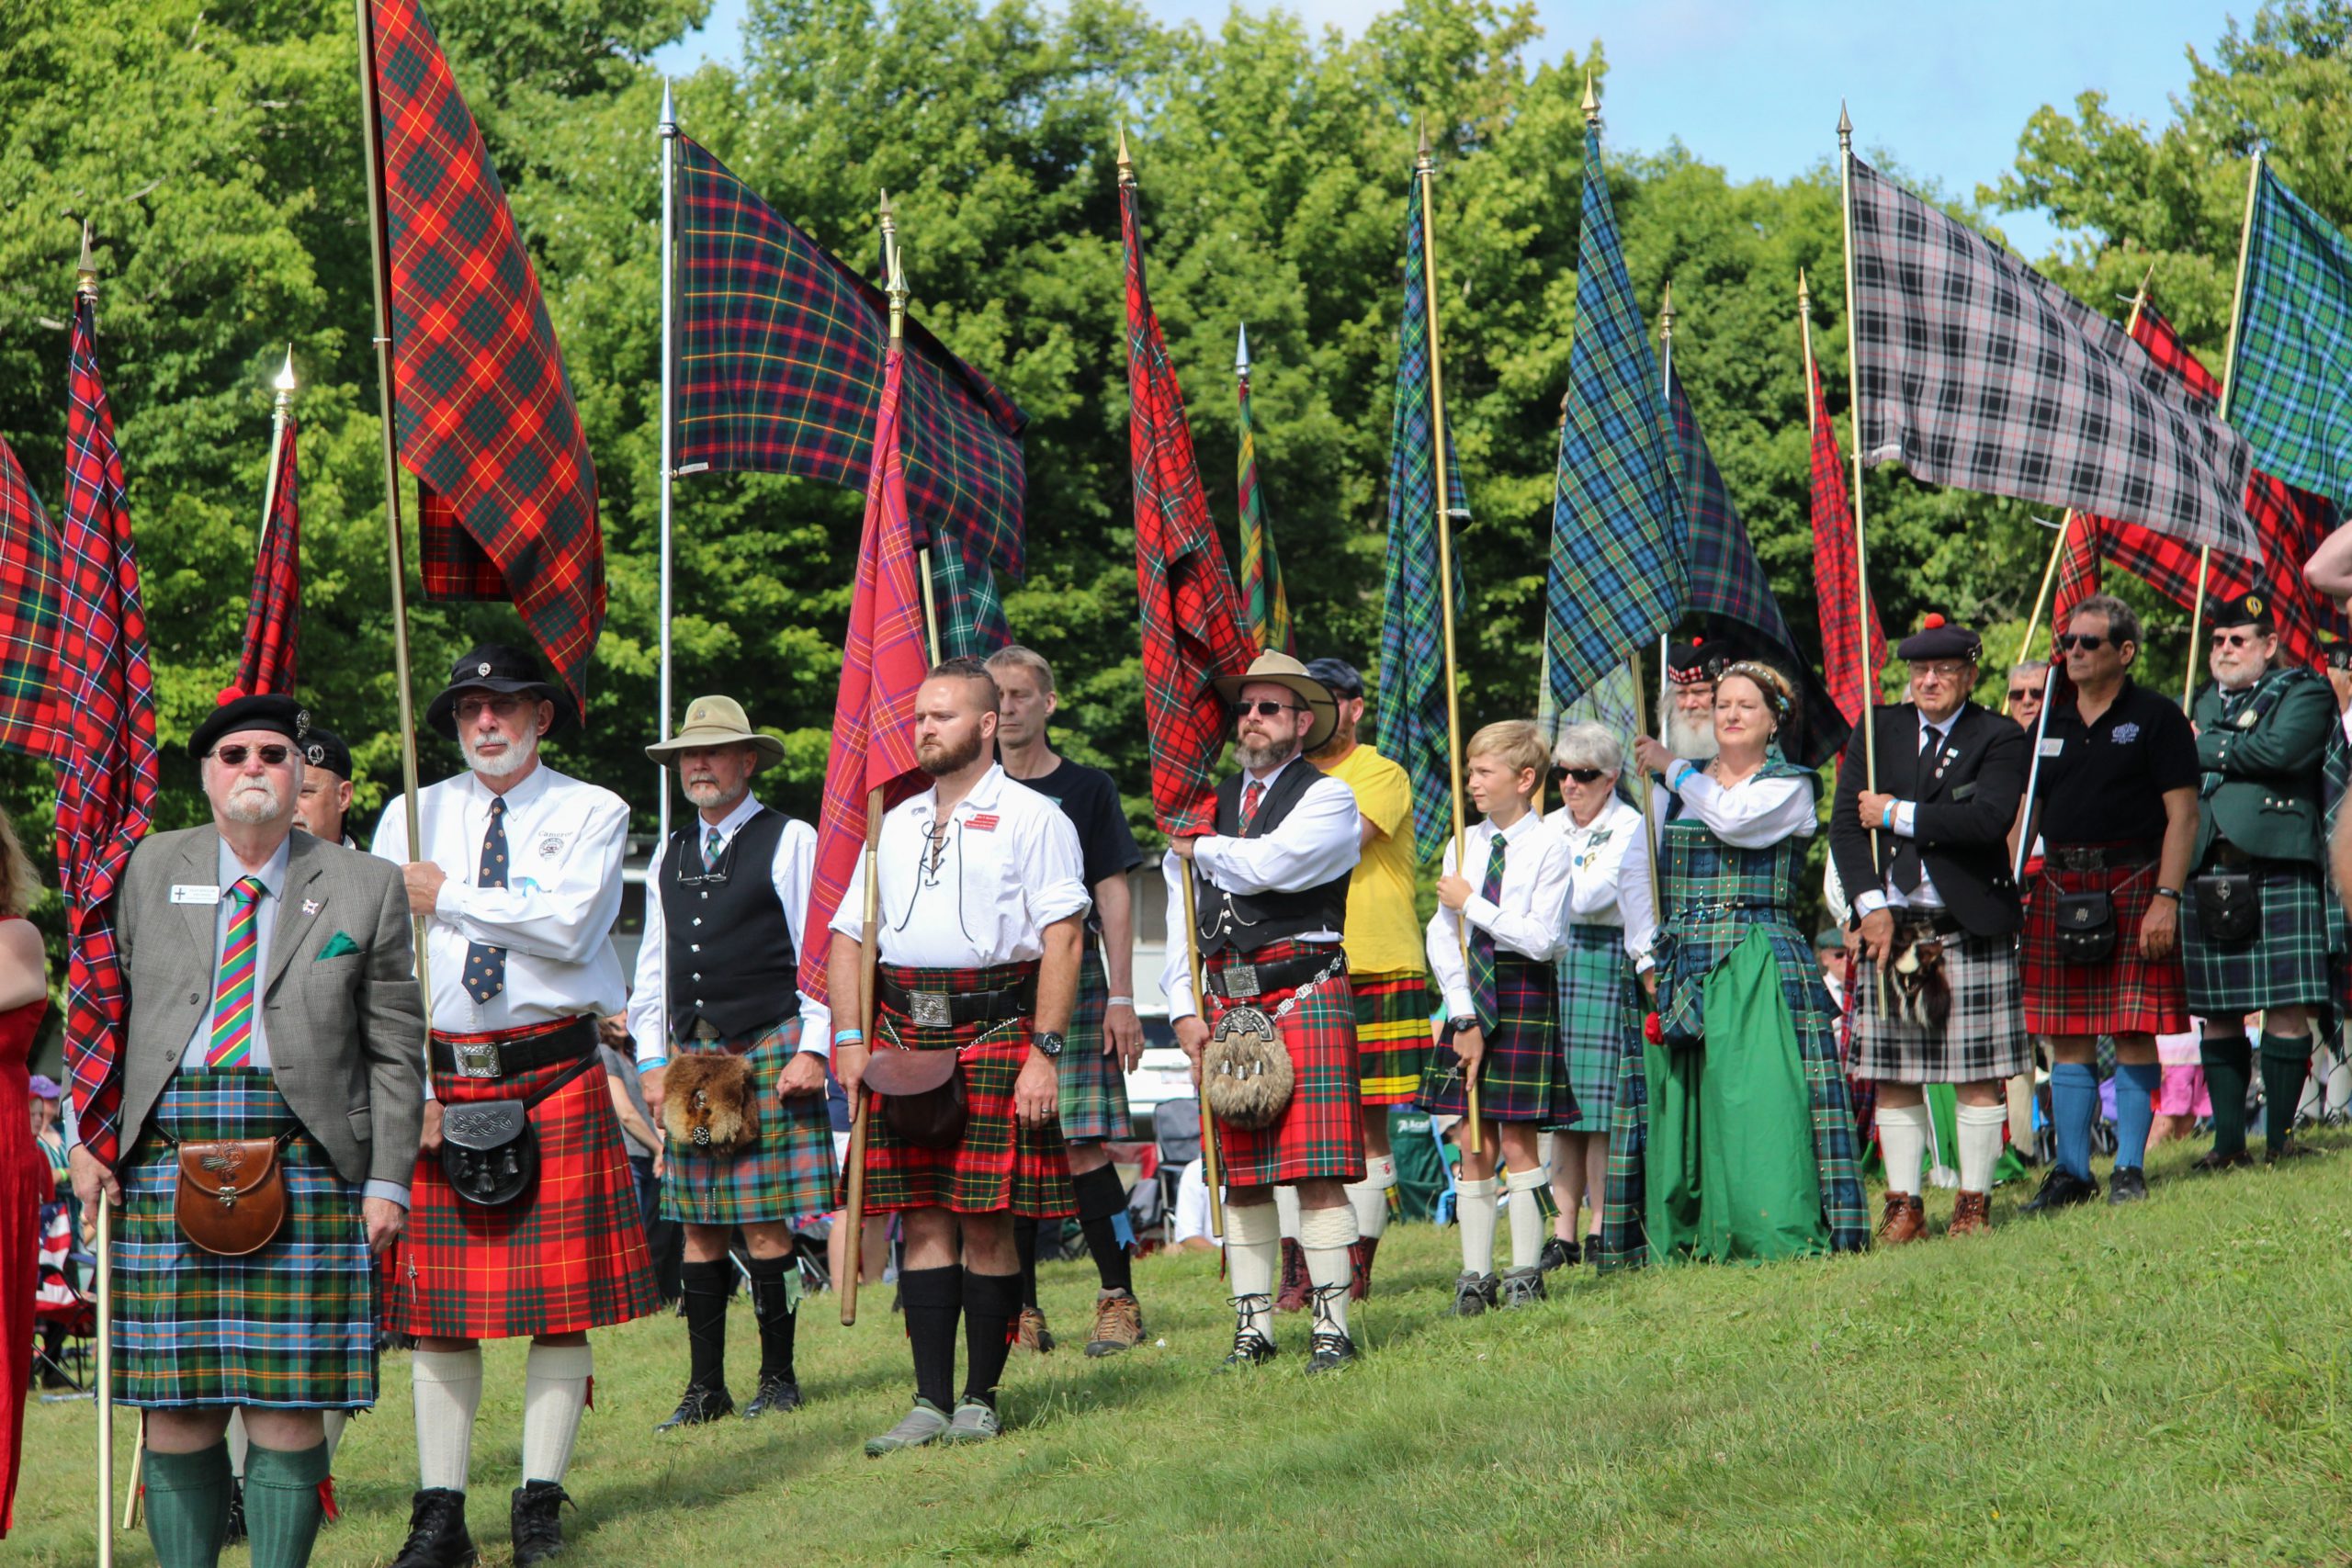 65th Grandfather Mountain Highland Games The Scottish Banner